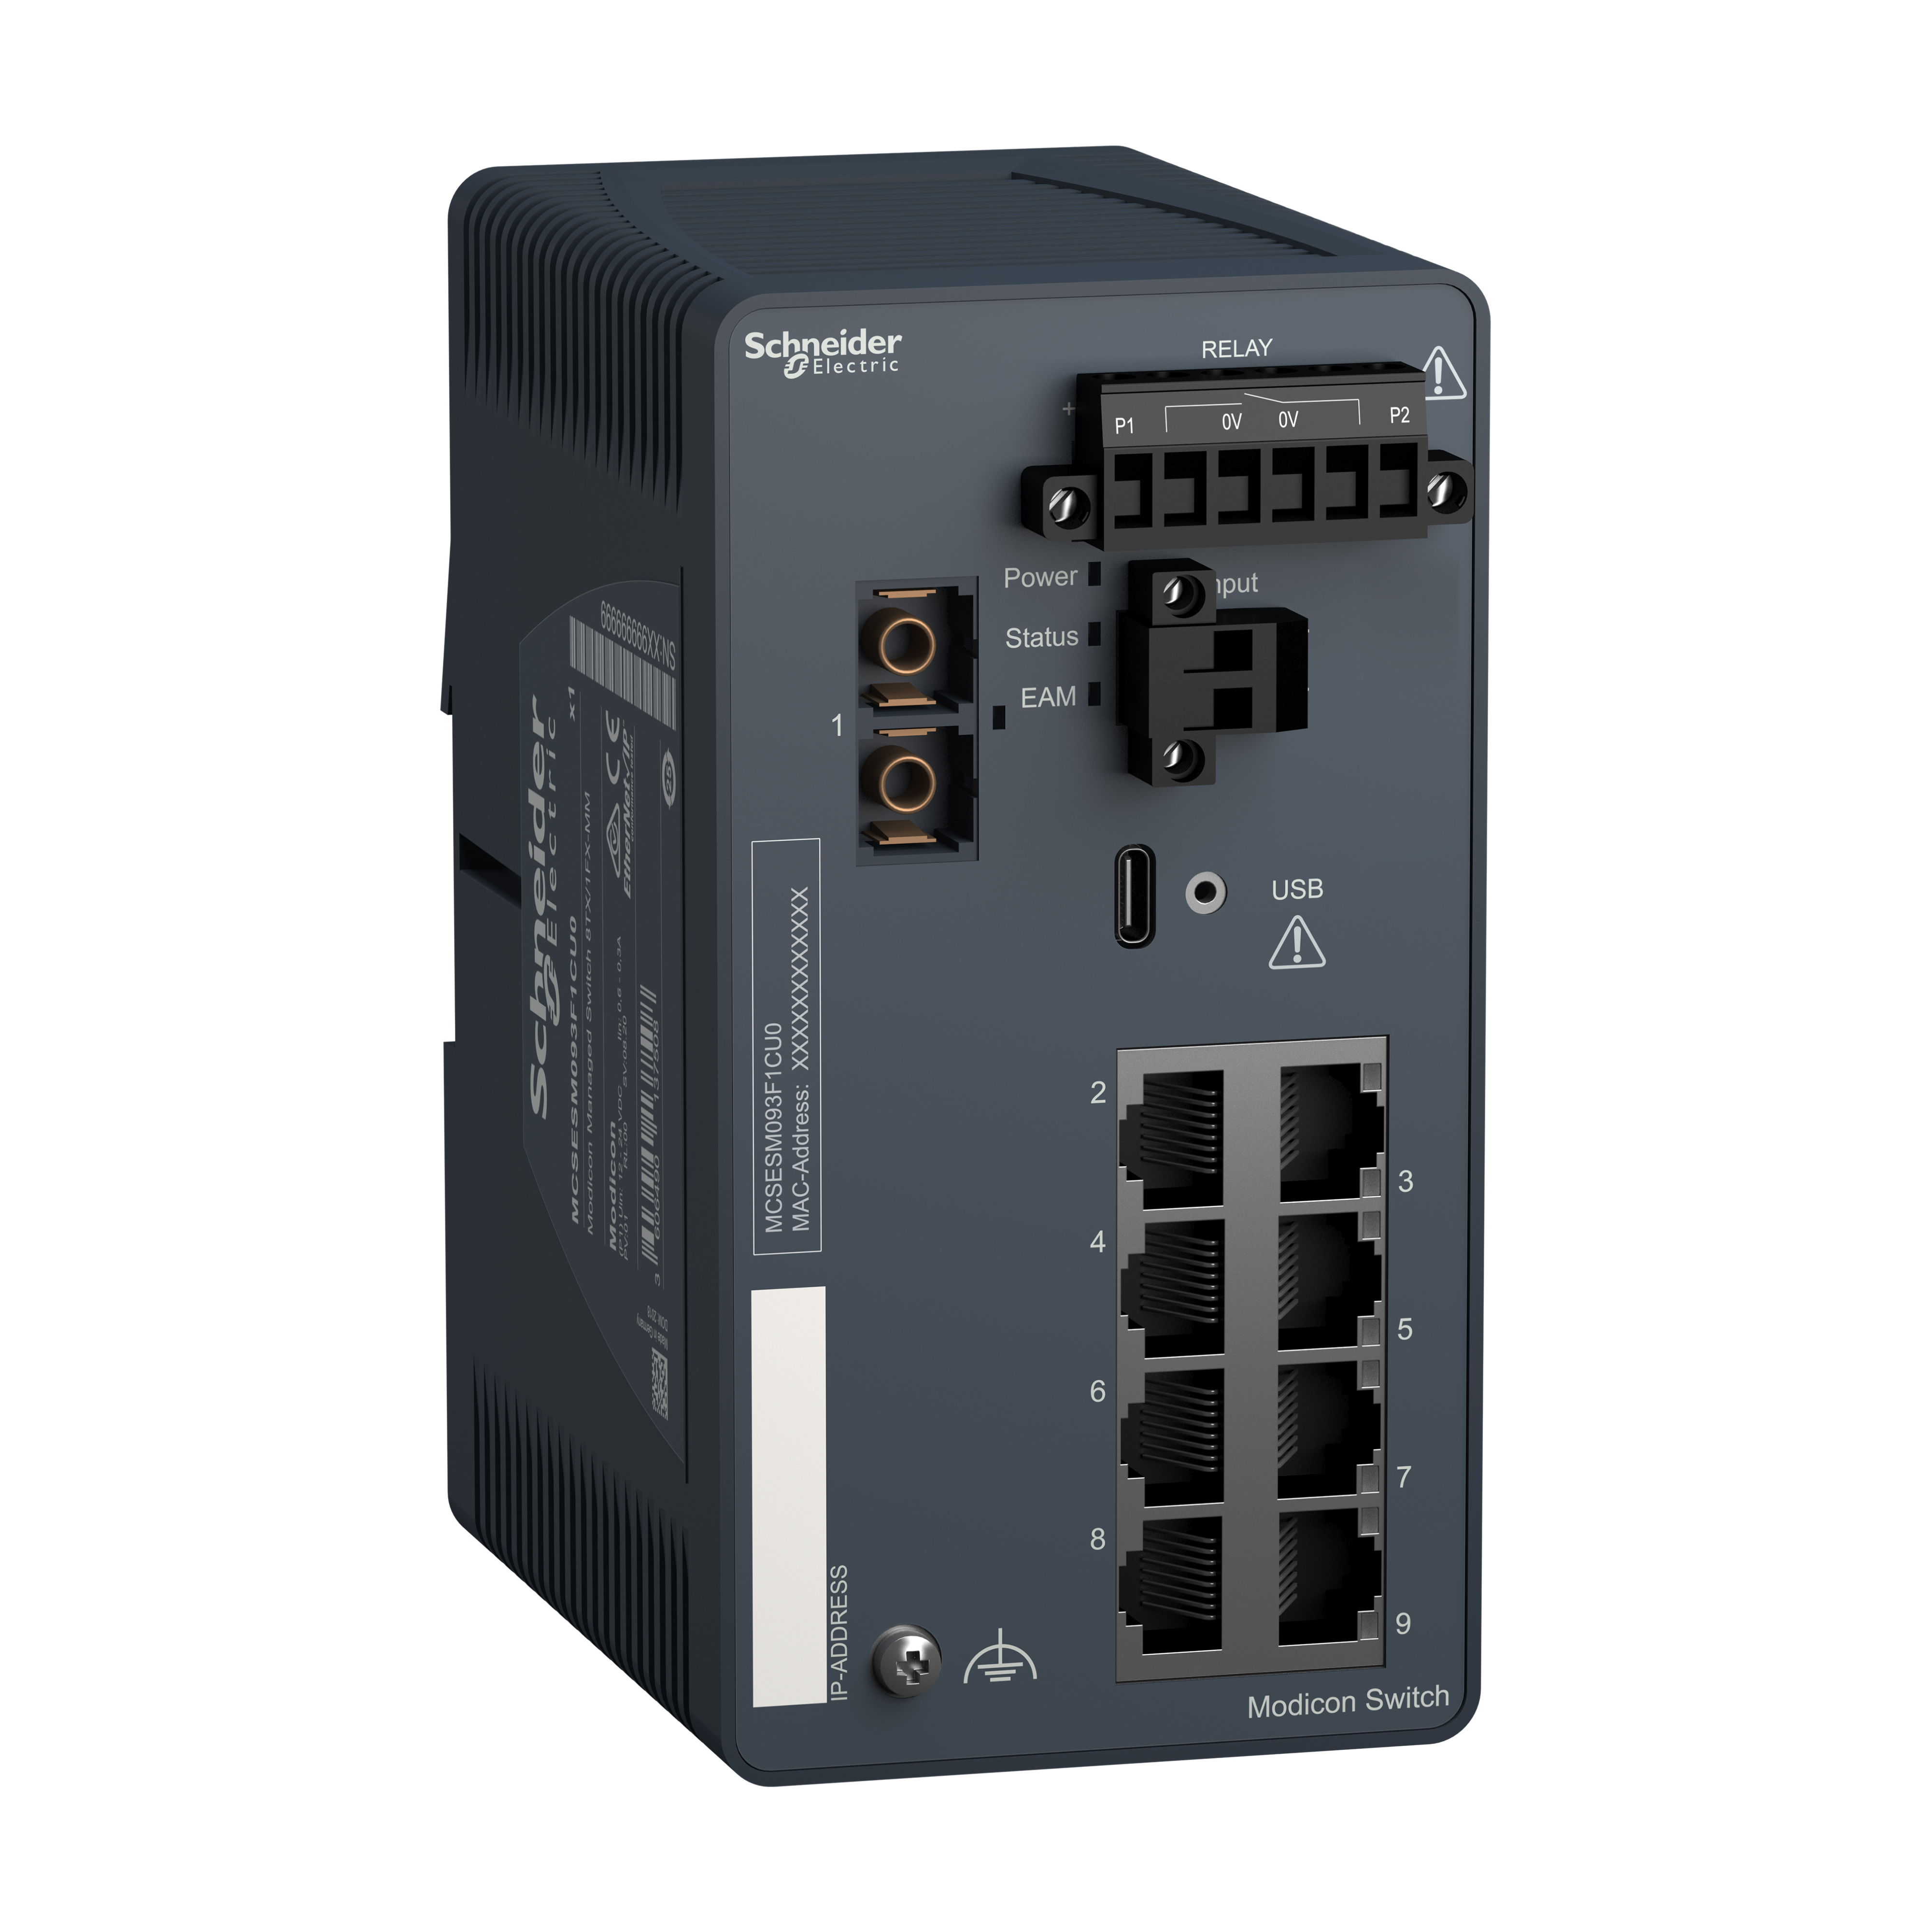 network switch, Modicon Networking, managed, 8 ports for copper with 1 port for fiber optic, multimode